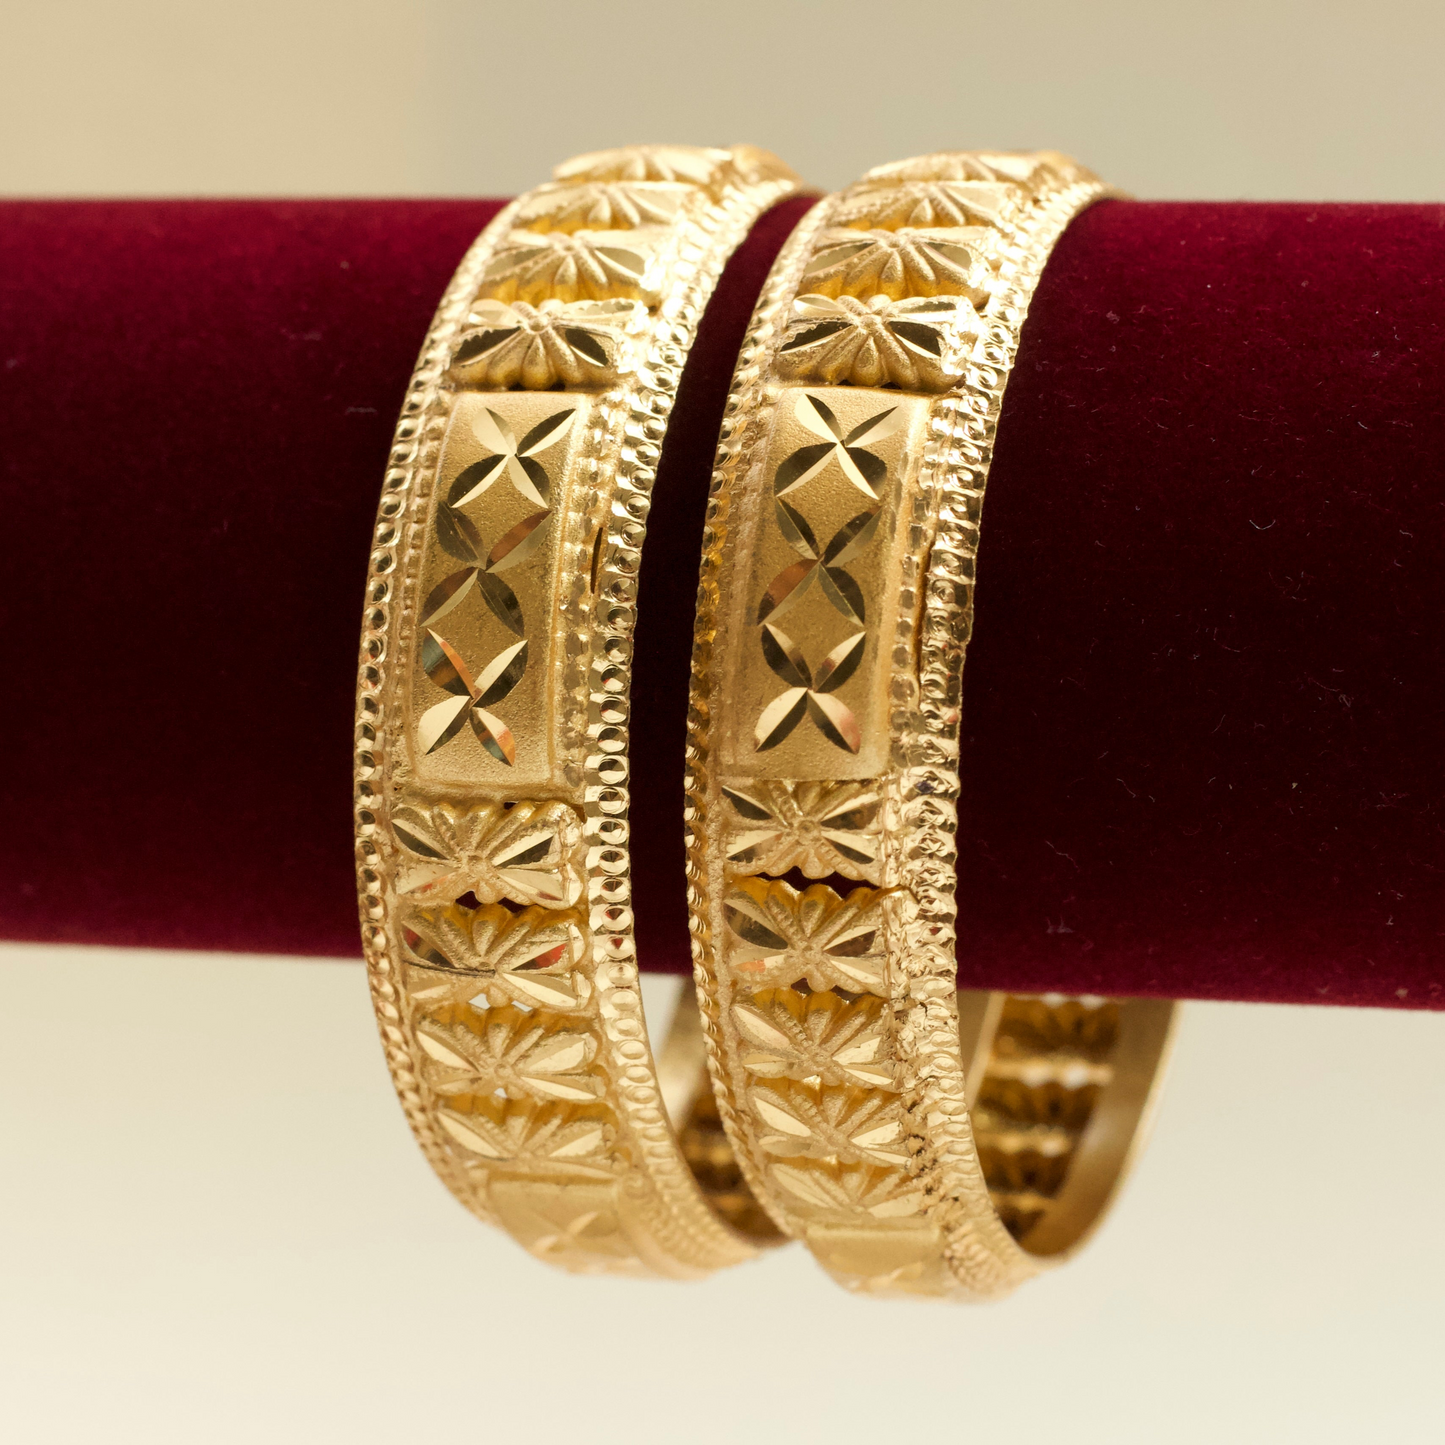 Real Gold Tone Thick Bangles - SS003 - Daily Wear/Office Wear/Function Wear Bangles